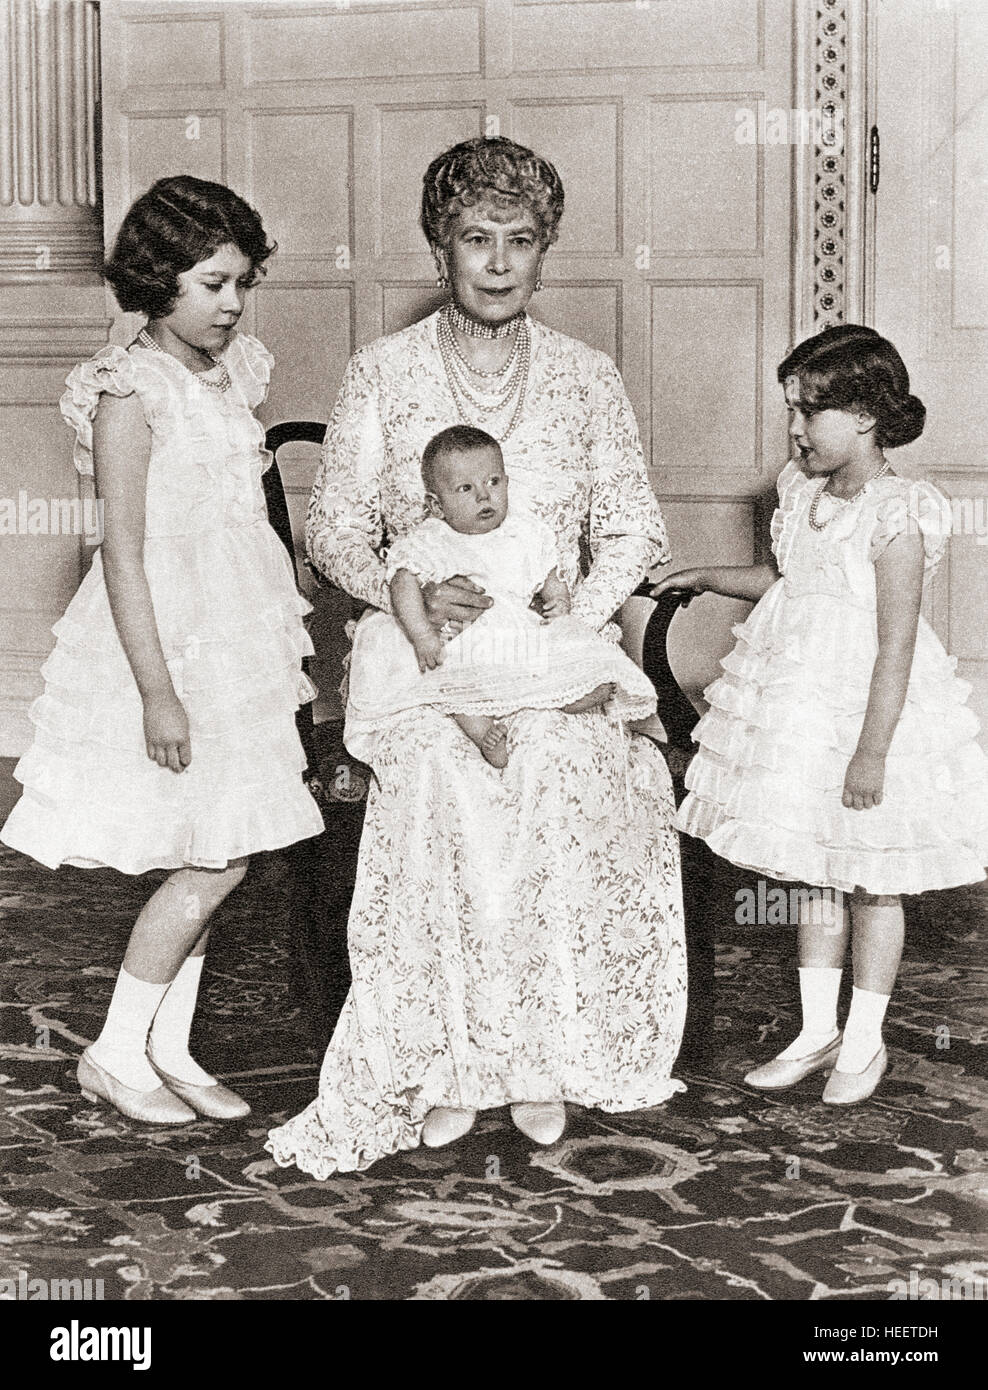 Mary of Teck with her grandchildren in 1936, Princess Elizabeth, left, Princess Margaret Rose, right and on her lap, Prince Edward.  Mary of Teck, 1867 – 1953.  Queen consort of the United Kingdom and the British Dominions and Empress of India as the wife of King-Emperor George V.  Princess Elizabeth, future Elizabeth II, 1926 - 2022.  Queen of the United Kingdom, Canada, Australia and New Zealand. Princess Margaret, Margaret Rose, 1930 – 2002, aka Princess Margaret Rose.  Younger daughter of King George VI and Queen Elizabeth. Prince Edward, Duke of Kent, born 1935. Stock Photo